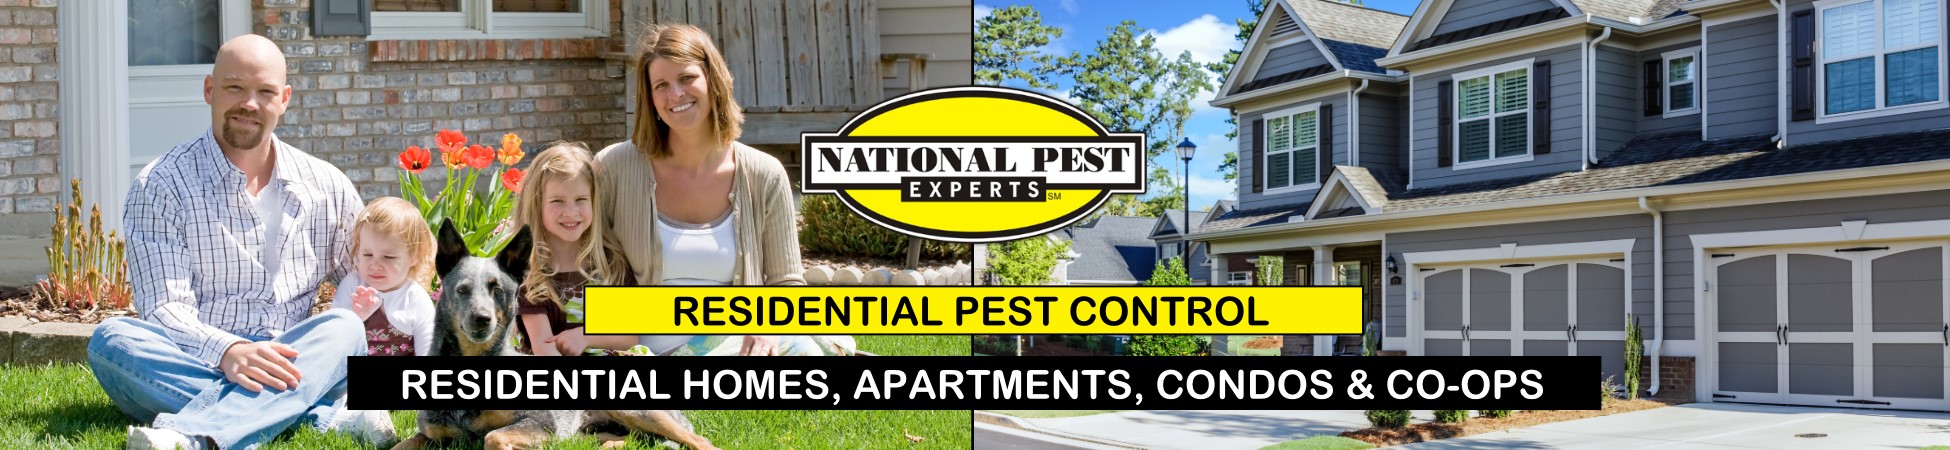 National Pest Experts - Residential exterminating and pest control in Glen Head, NY